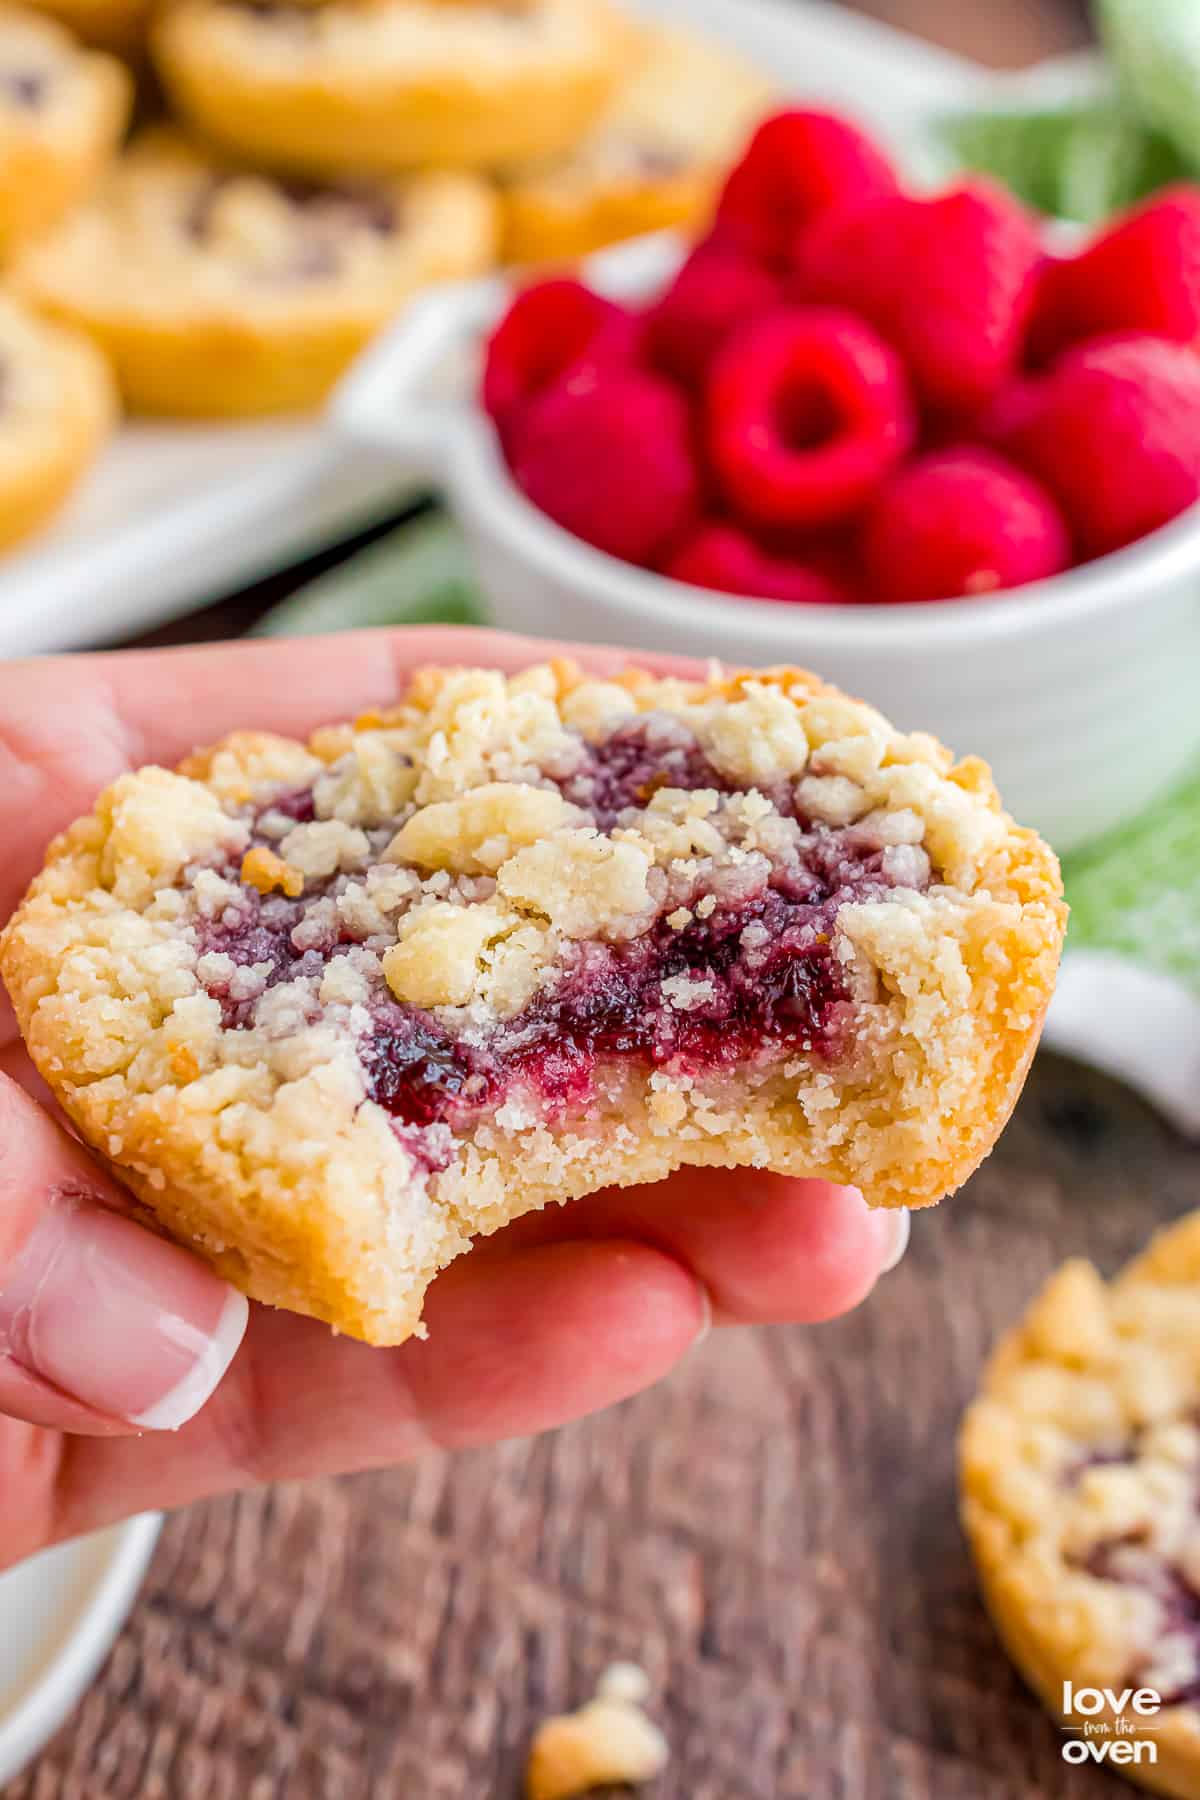 A hand holding a raspberry crumble cookie with a bite taken out of it.